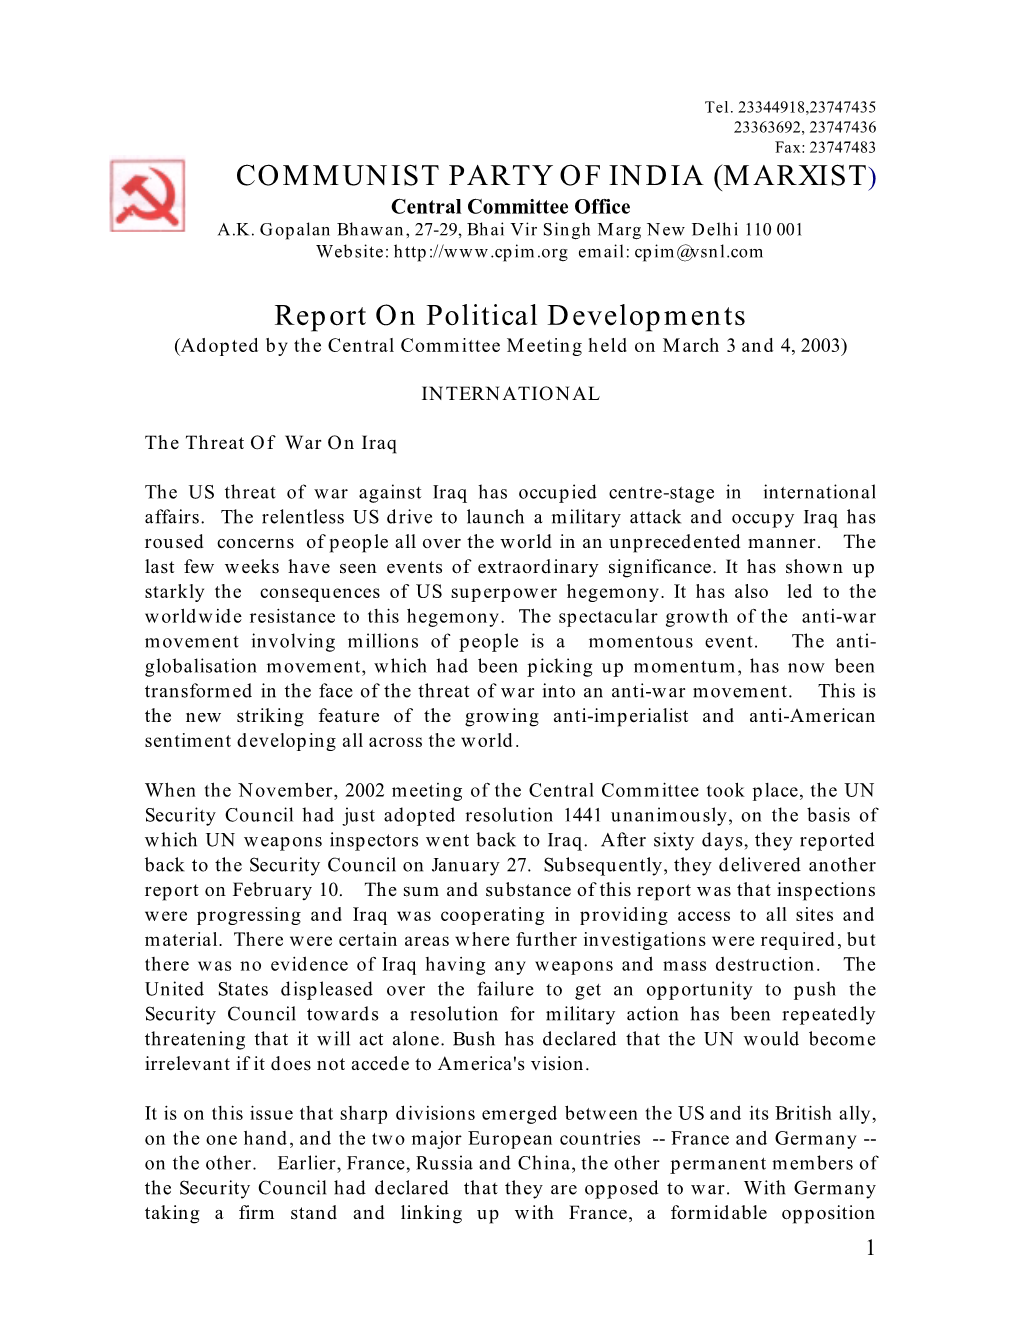 Report on Political Developments (Adopted by the Central Committee Meeting Held on March 3 and 4, 2003)